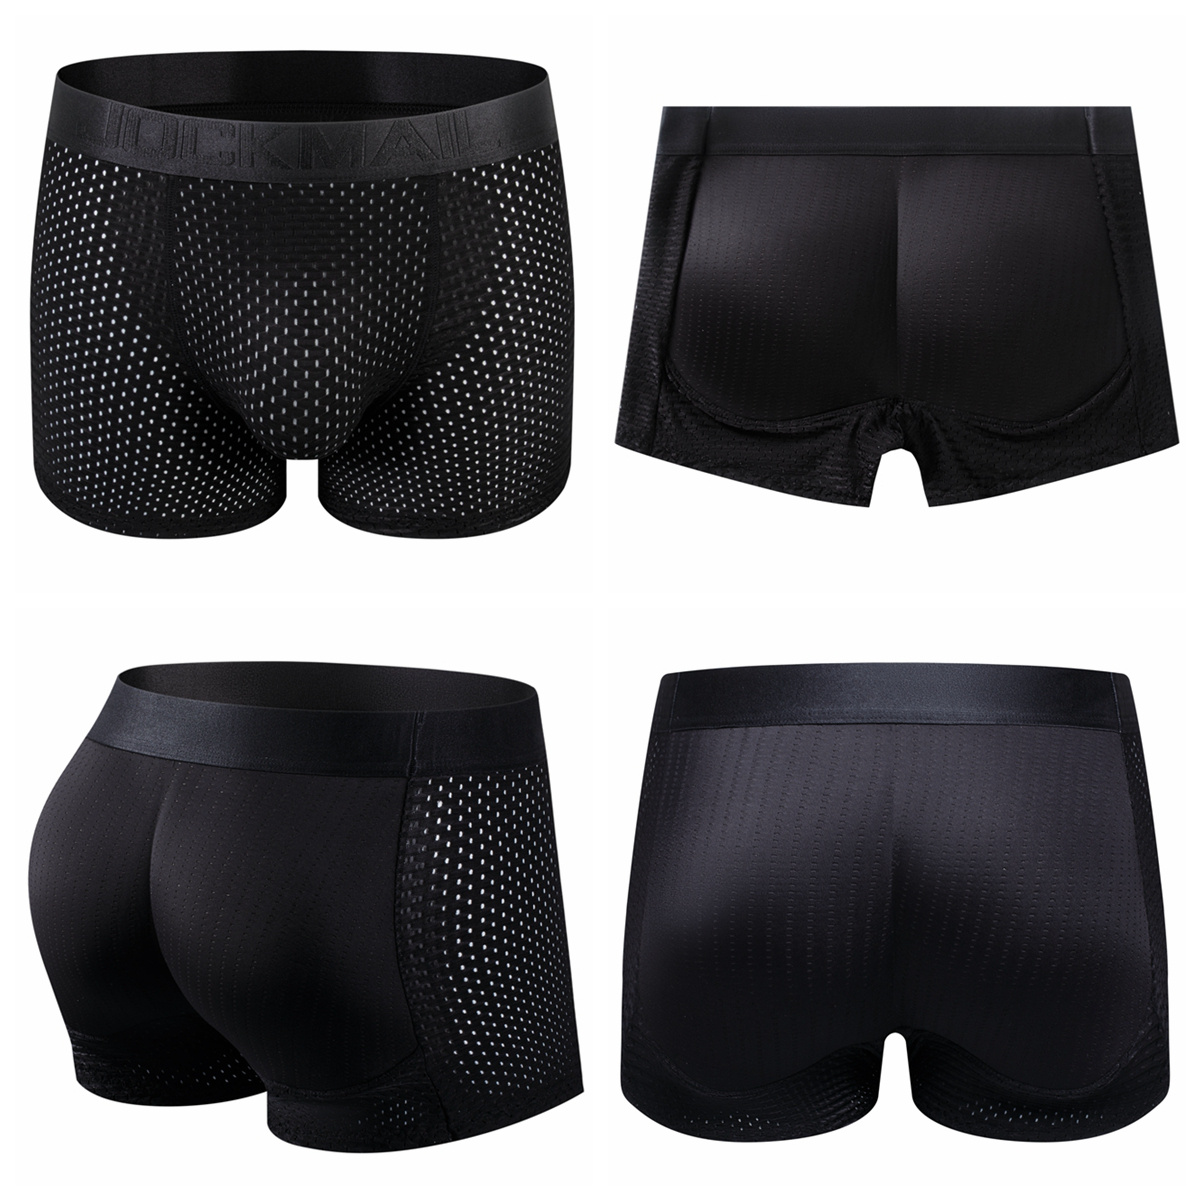 

1pc Men's Underwear, Mesh Breathable Comfy Stretchy Boxer Briefs Shorts, Butt Shaping Trunks, Gym Athletic Hip Lifting Boxer Panties